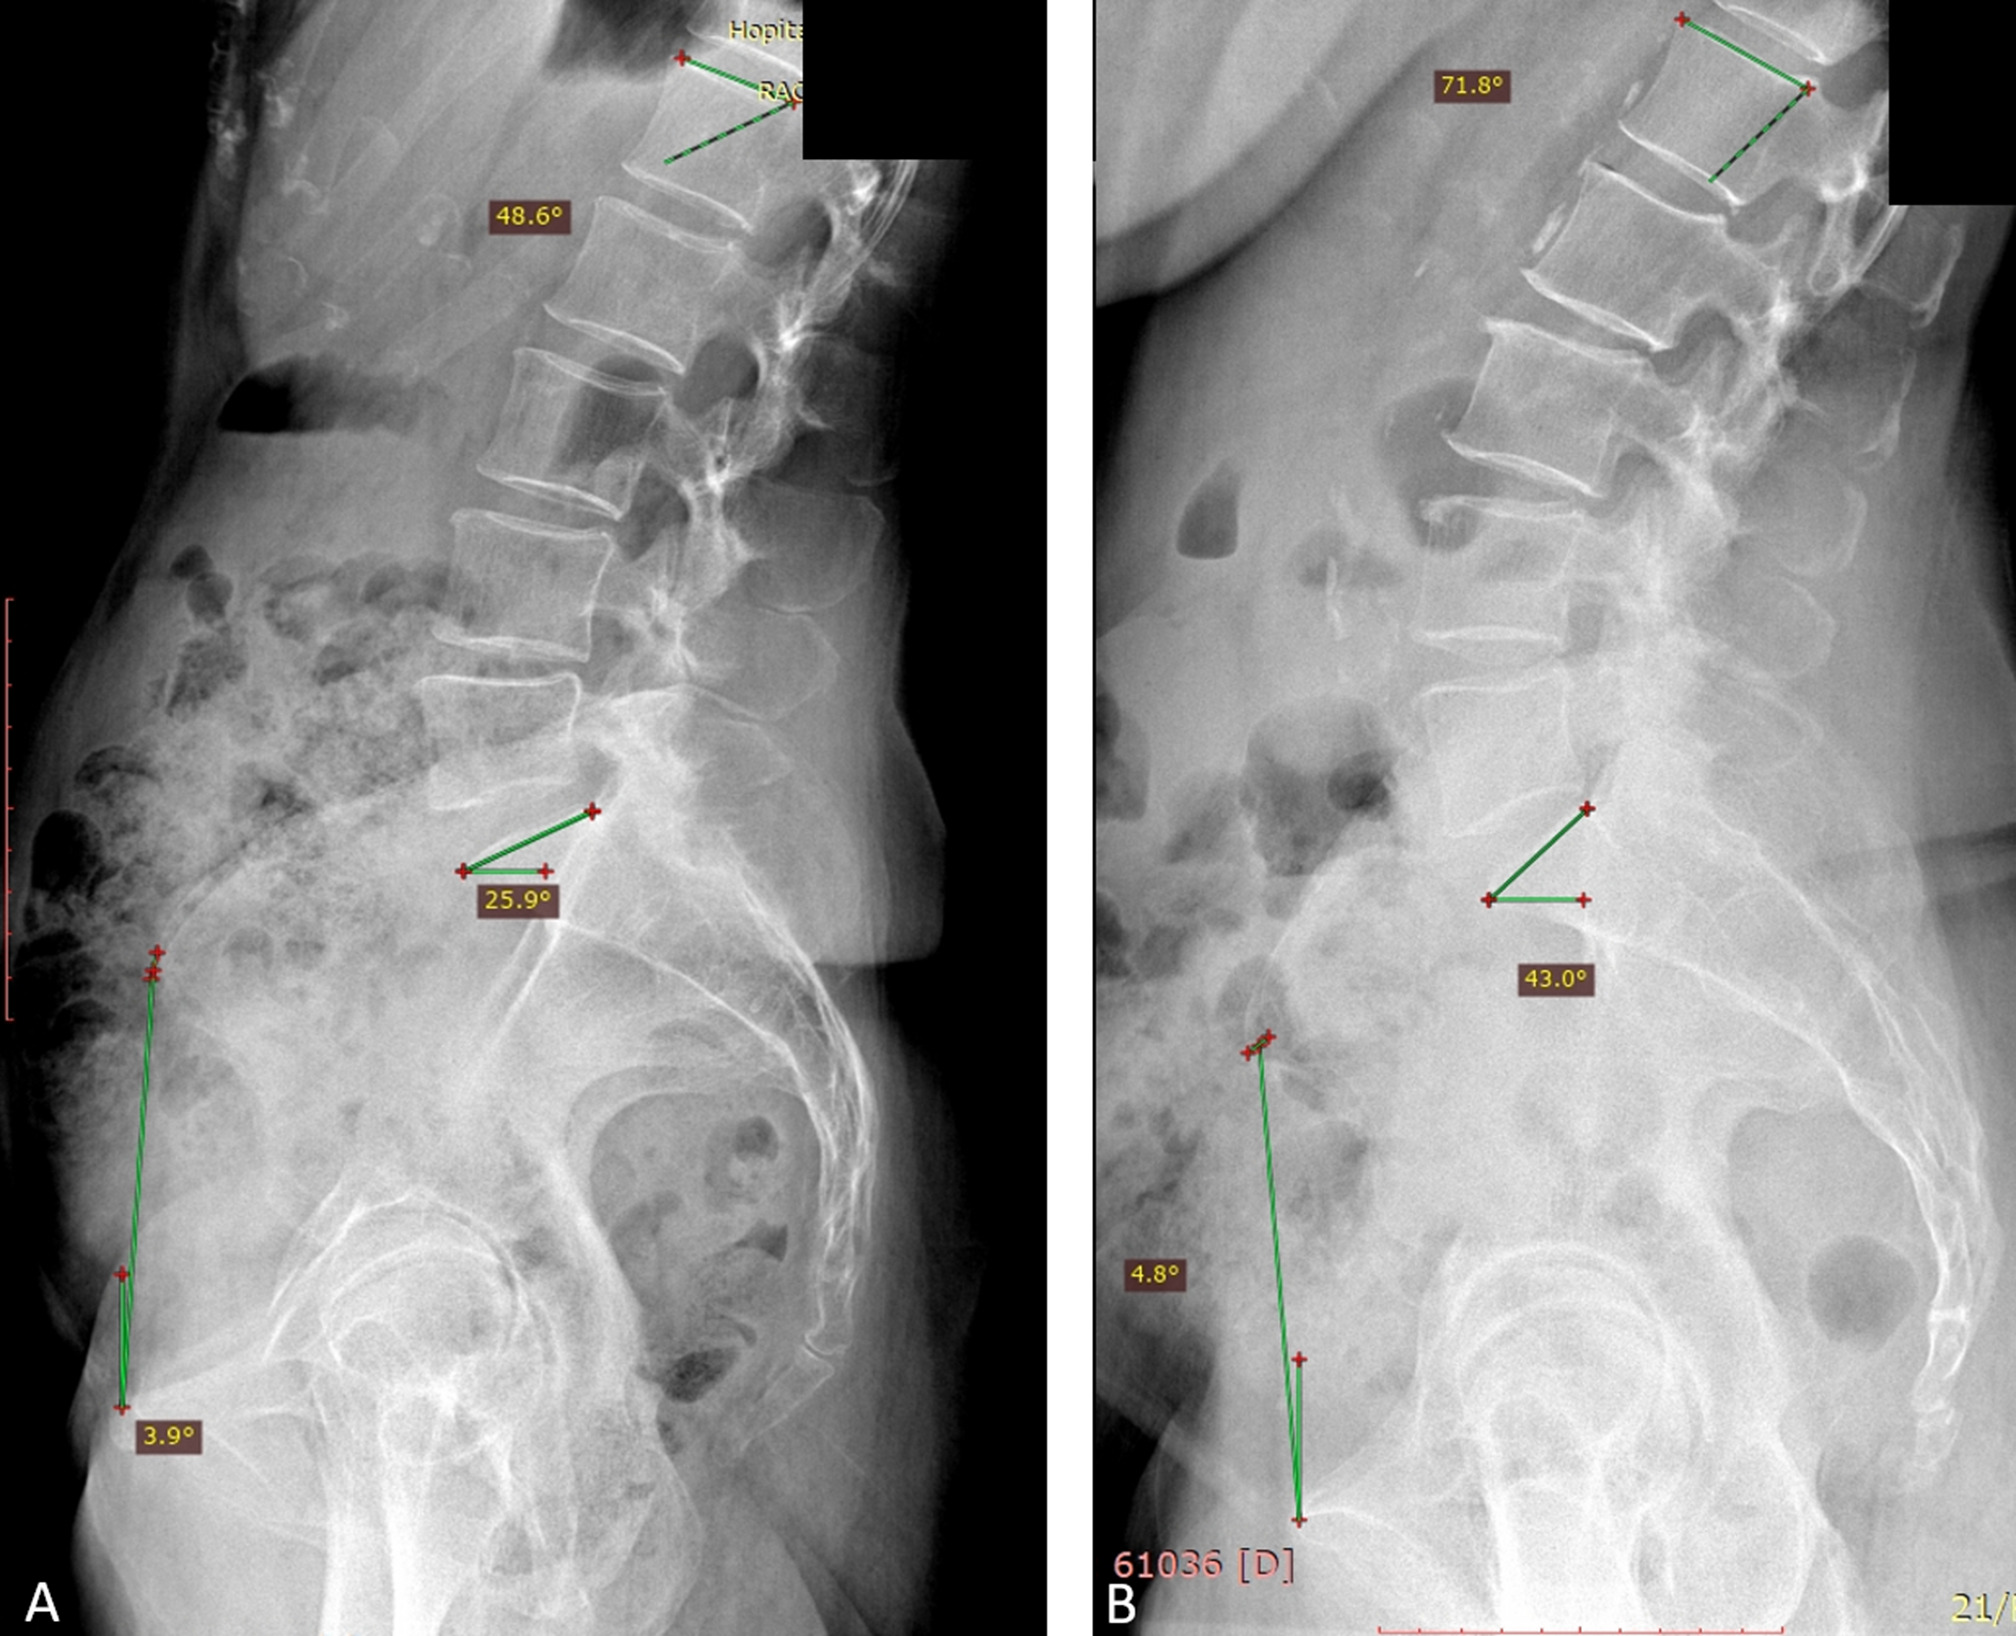 Fig. 3 
            Type of lumbar shape in patients with low pelvic incidence (PI) in lateral standing radiographs. a) Patient with low PI and low lordosis. PI = 38°, spinopelvic tilt (SPT) = -4°, lumbar lordosis (LL) 49°, sacral slope (SS) 26°, and lumbar apex at level L5. b) Patient with low anteverted PI 39°, SPT 5°, LL 71°, SS 42°, and lumbar apex at level L4.
          